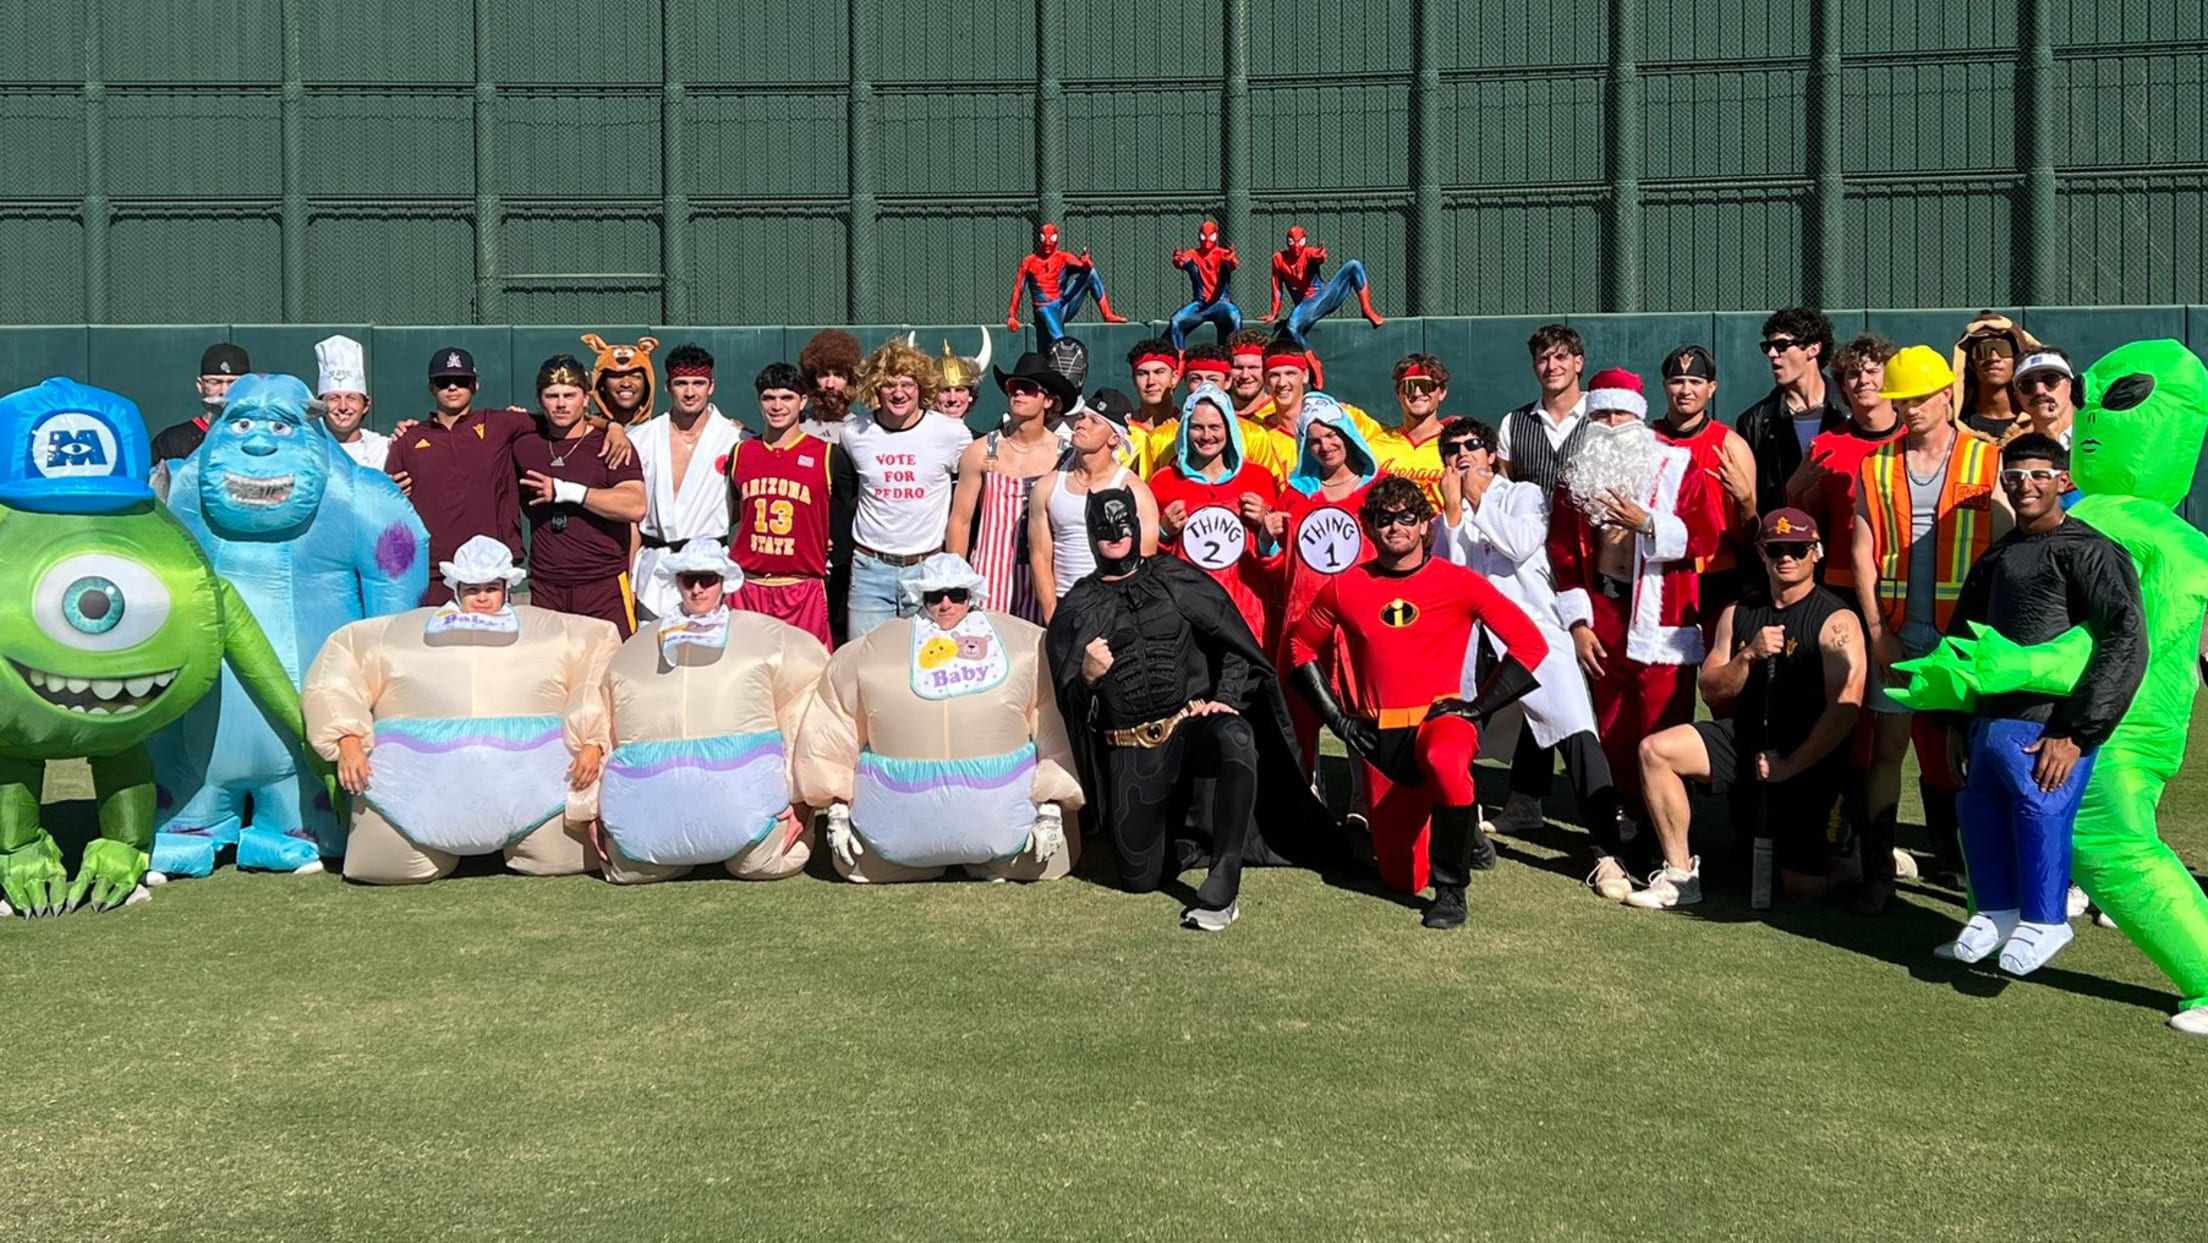 A group photo of a baseball team in costume